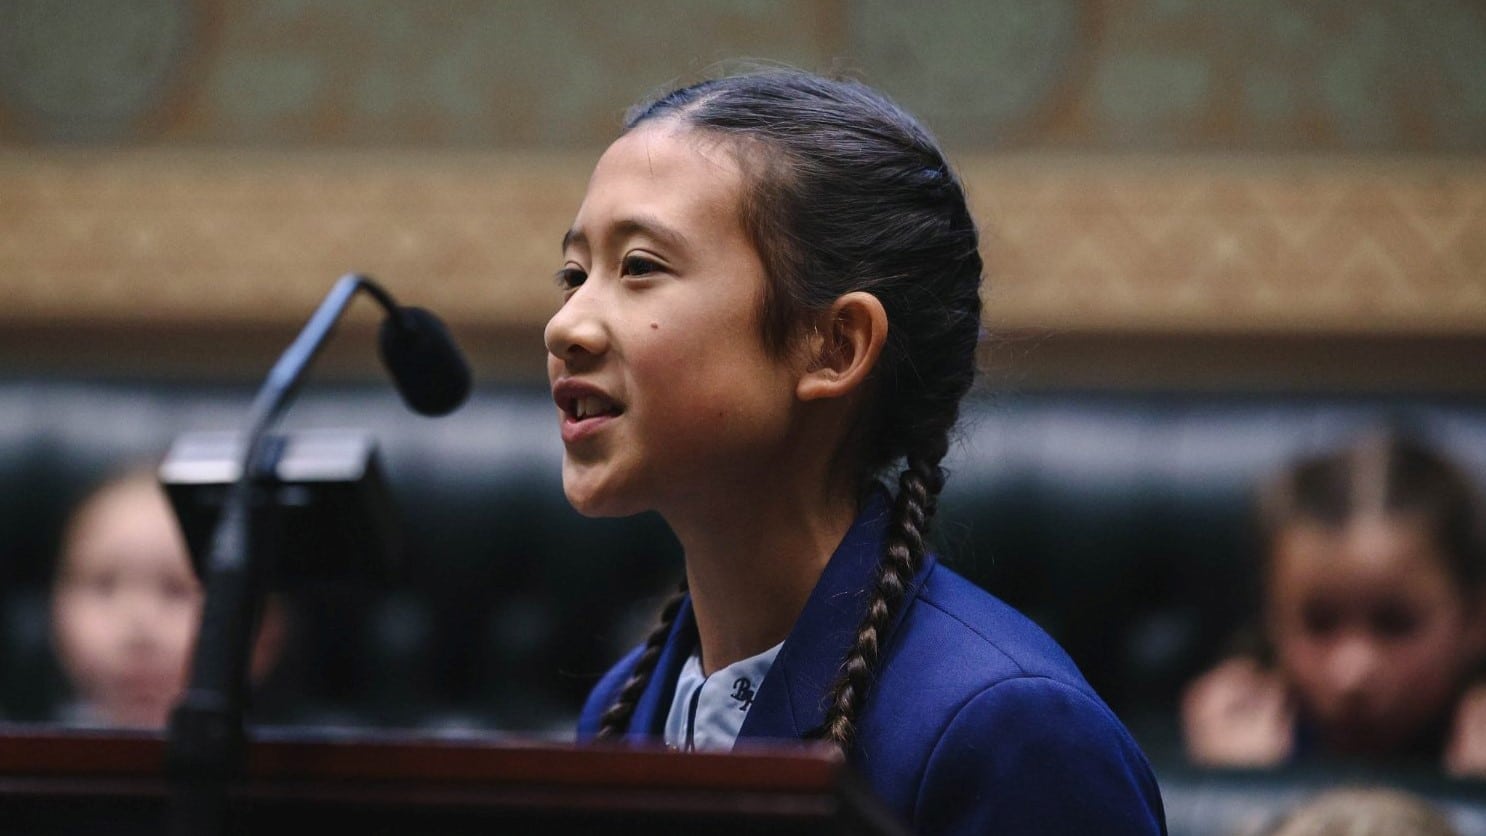 The 11-year-old who could change NSW